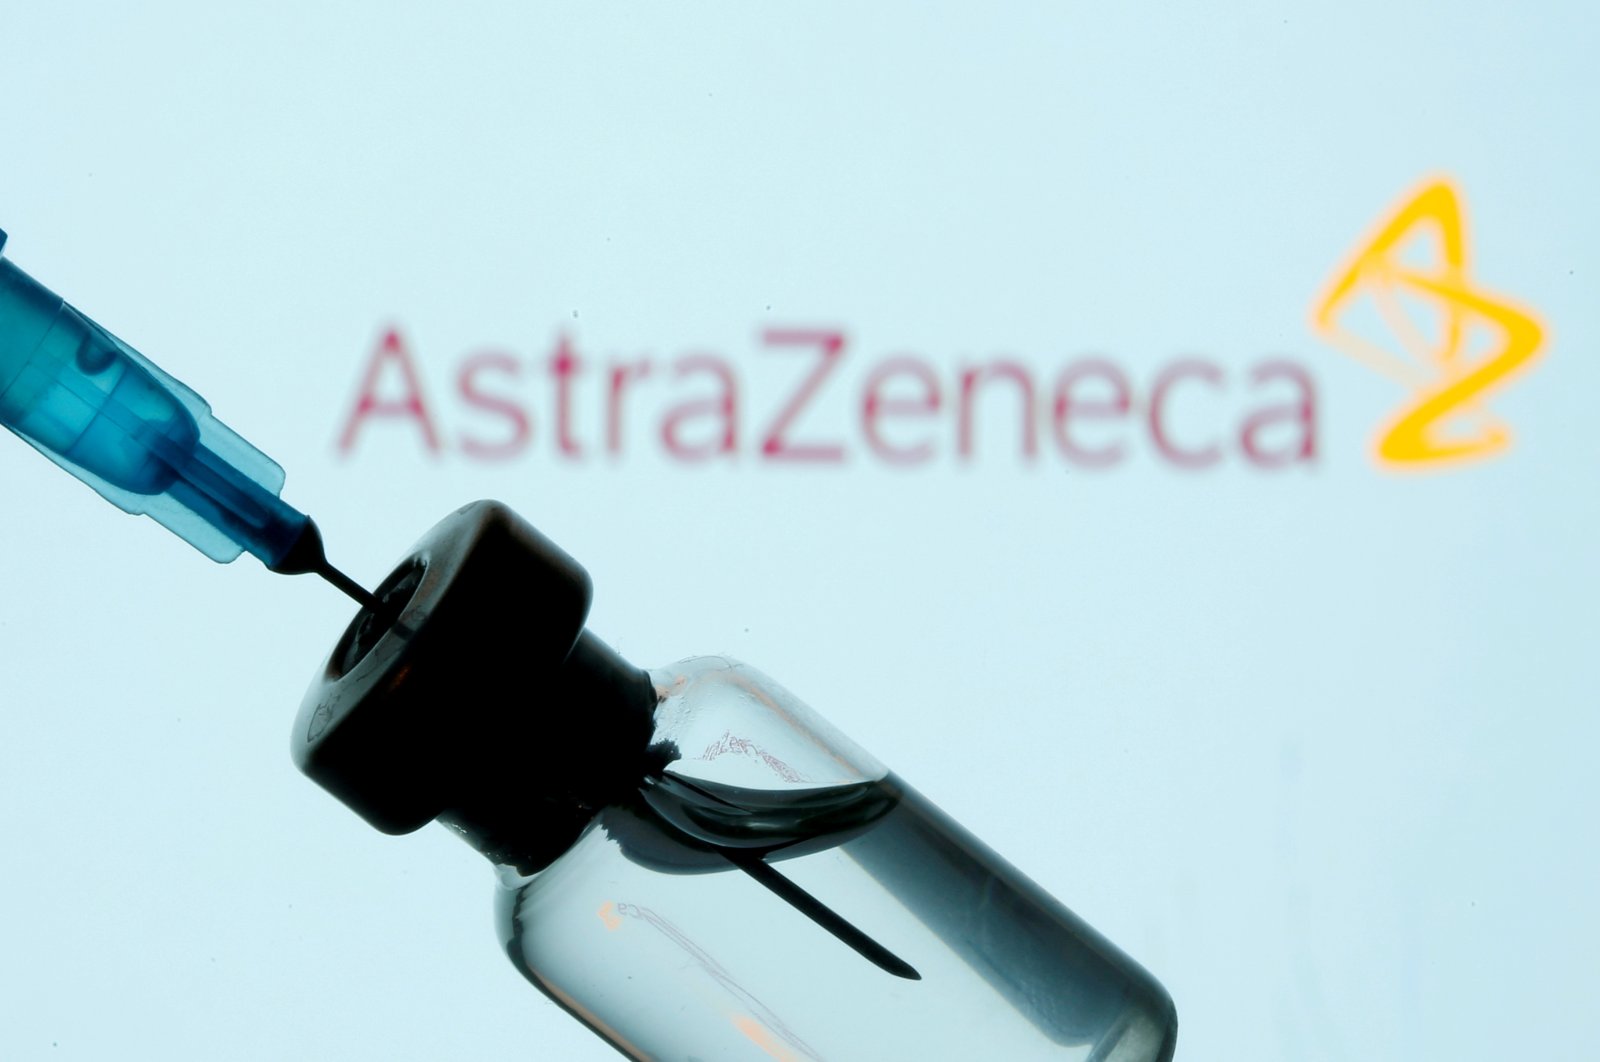 A vial and syringe are seen in front of an AstraZeneca logo in the illustration created on Jan. 11, 2021. (REUTERS Photo)